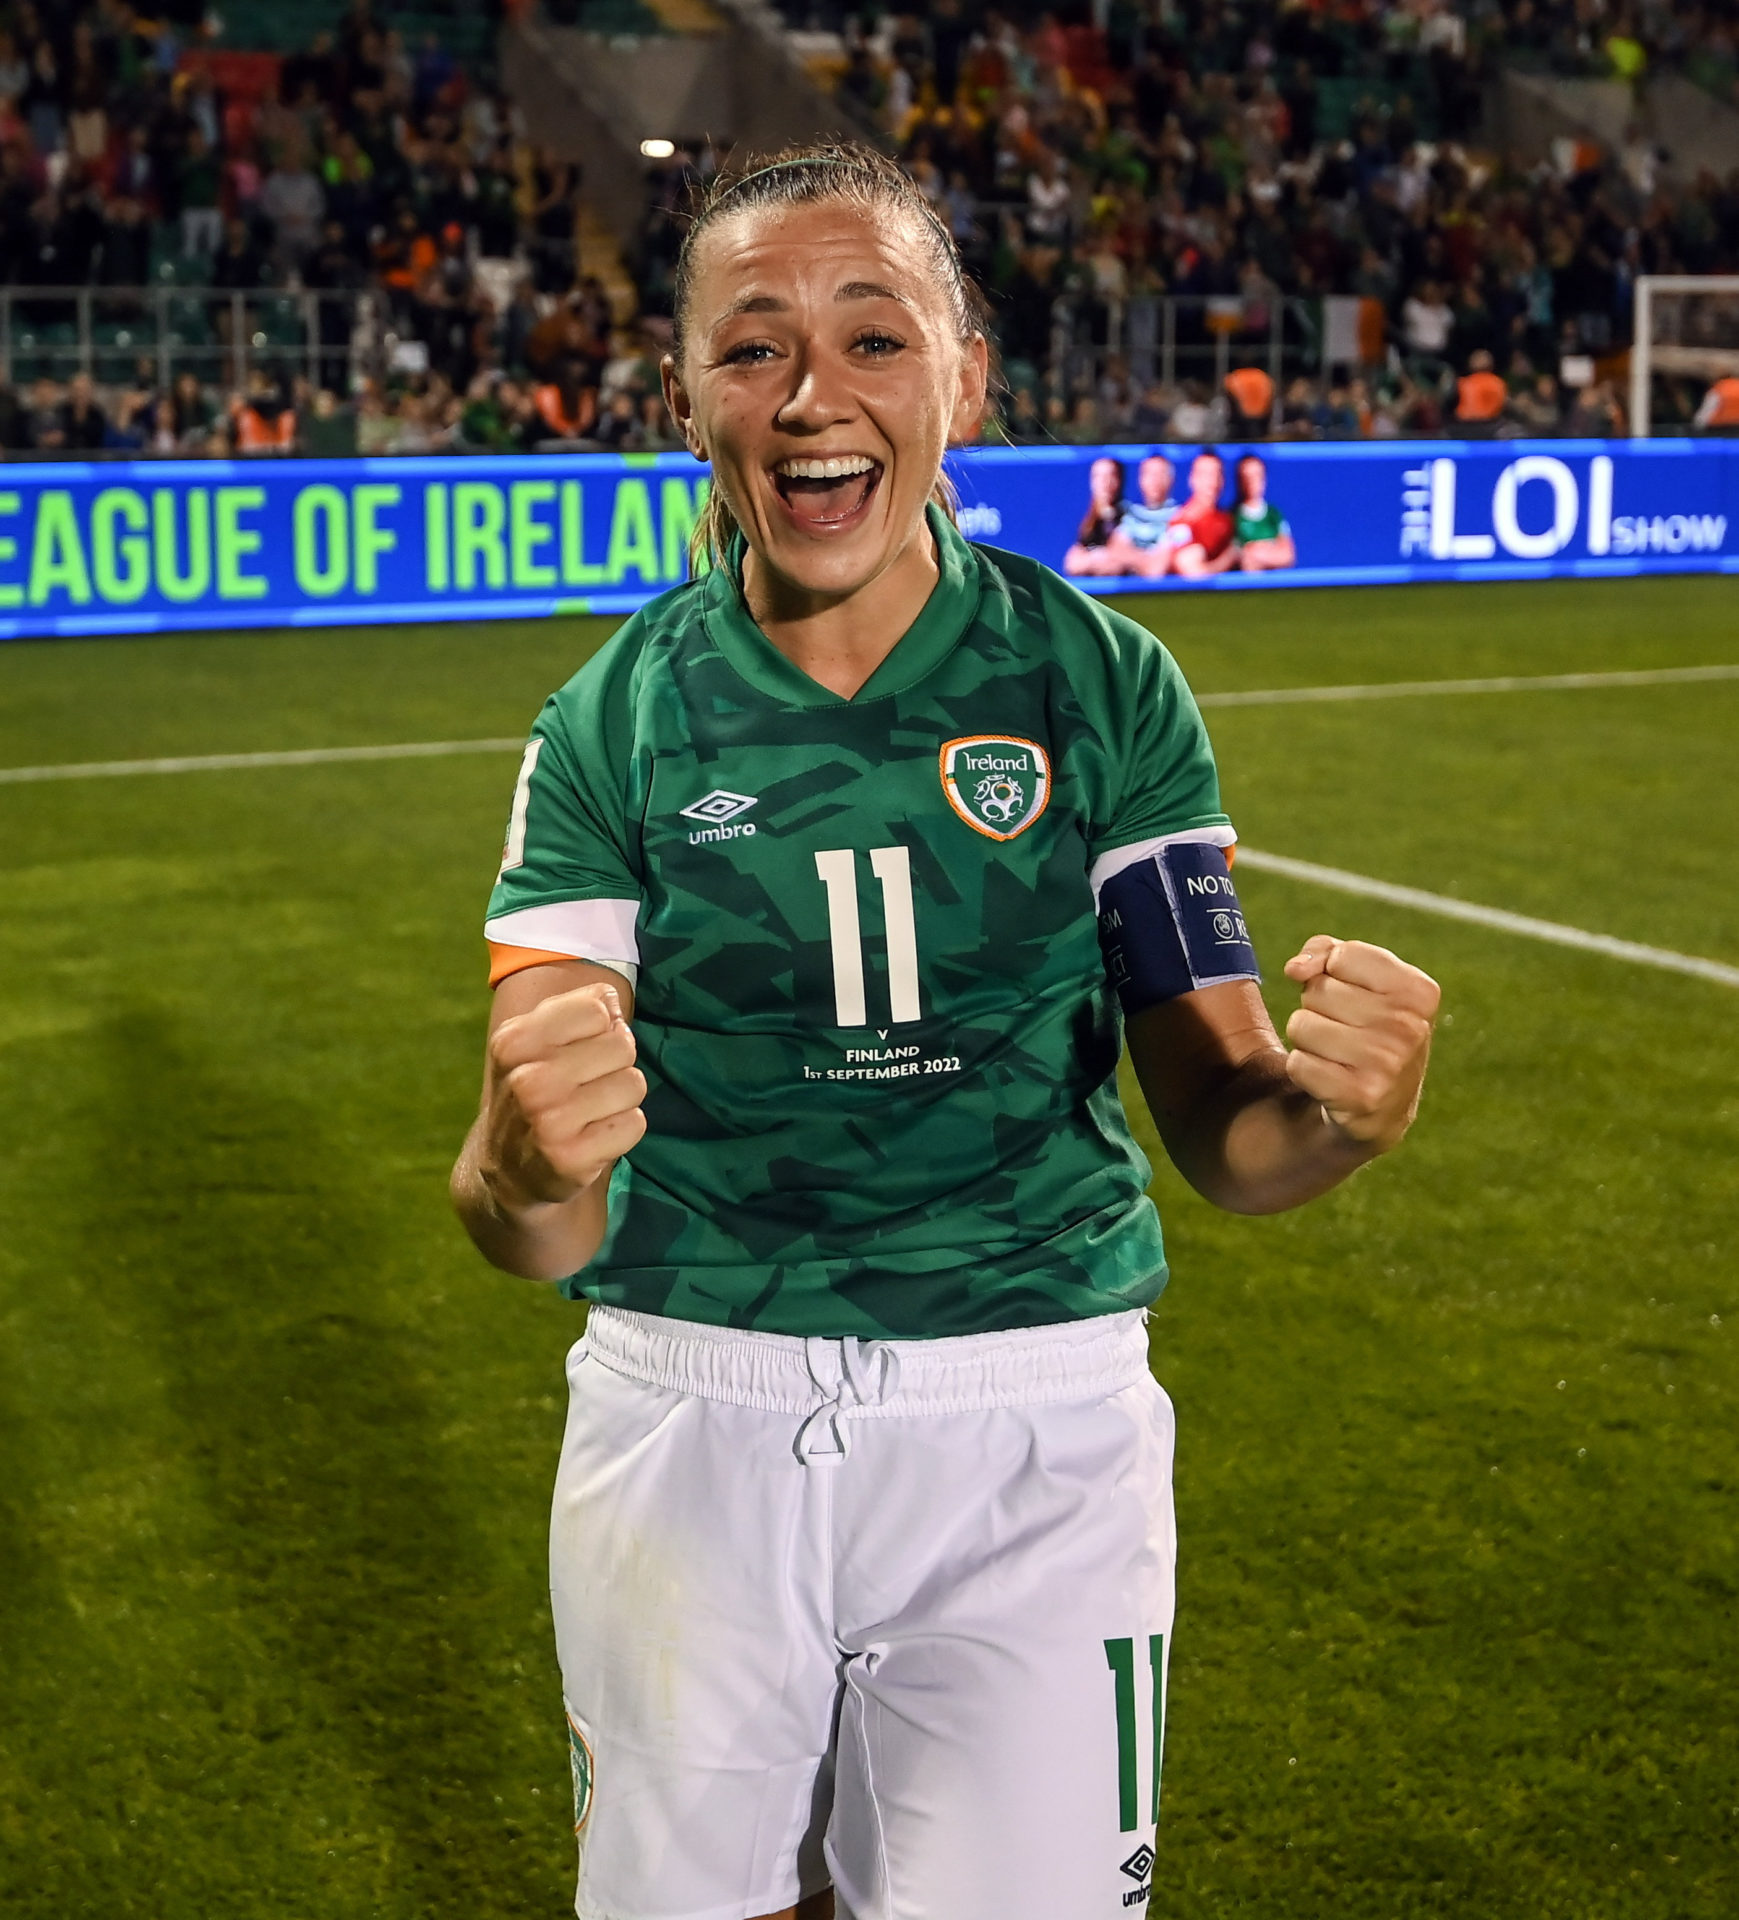 Ireland captain Katie McCabe celebrates after the FIFA Women's World Cup 2023 qualifier match between Republic of Ireland and Finland at Tallaght Stadium in Dublin